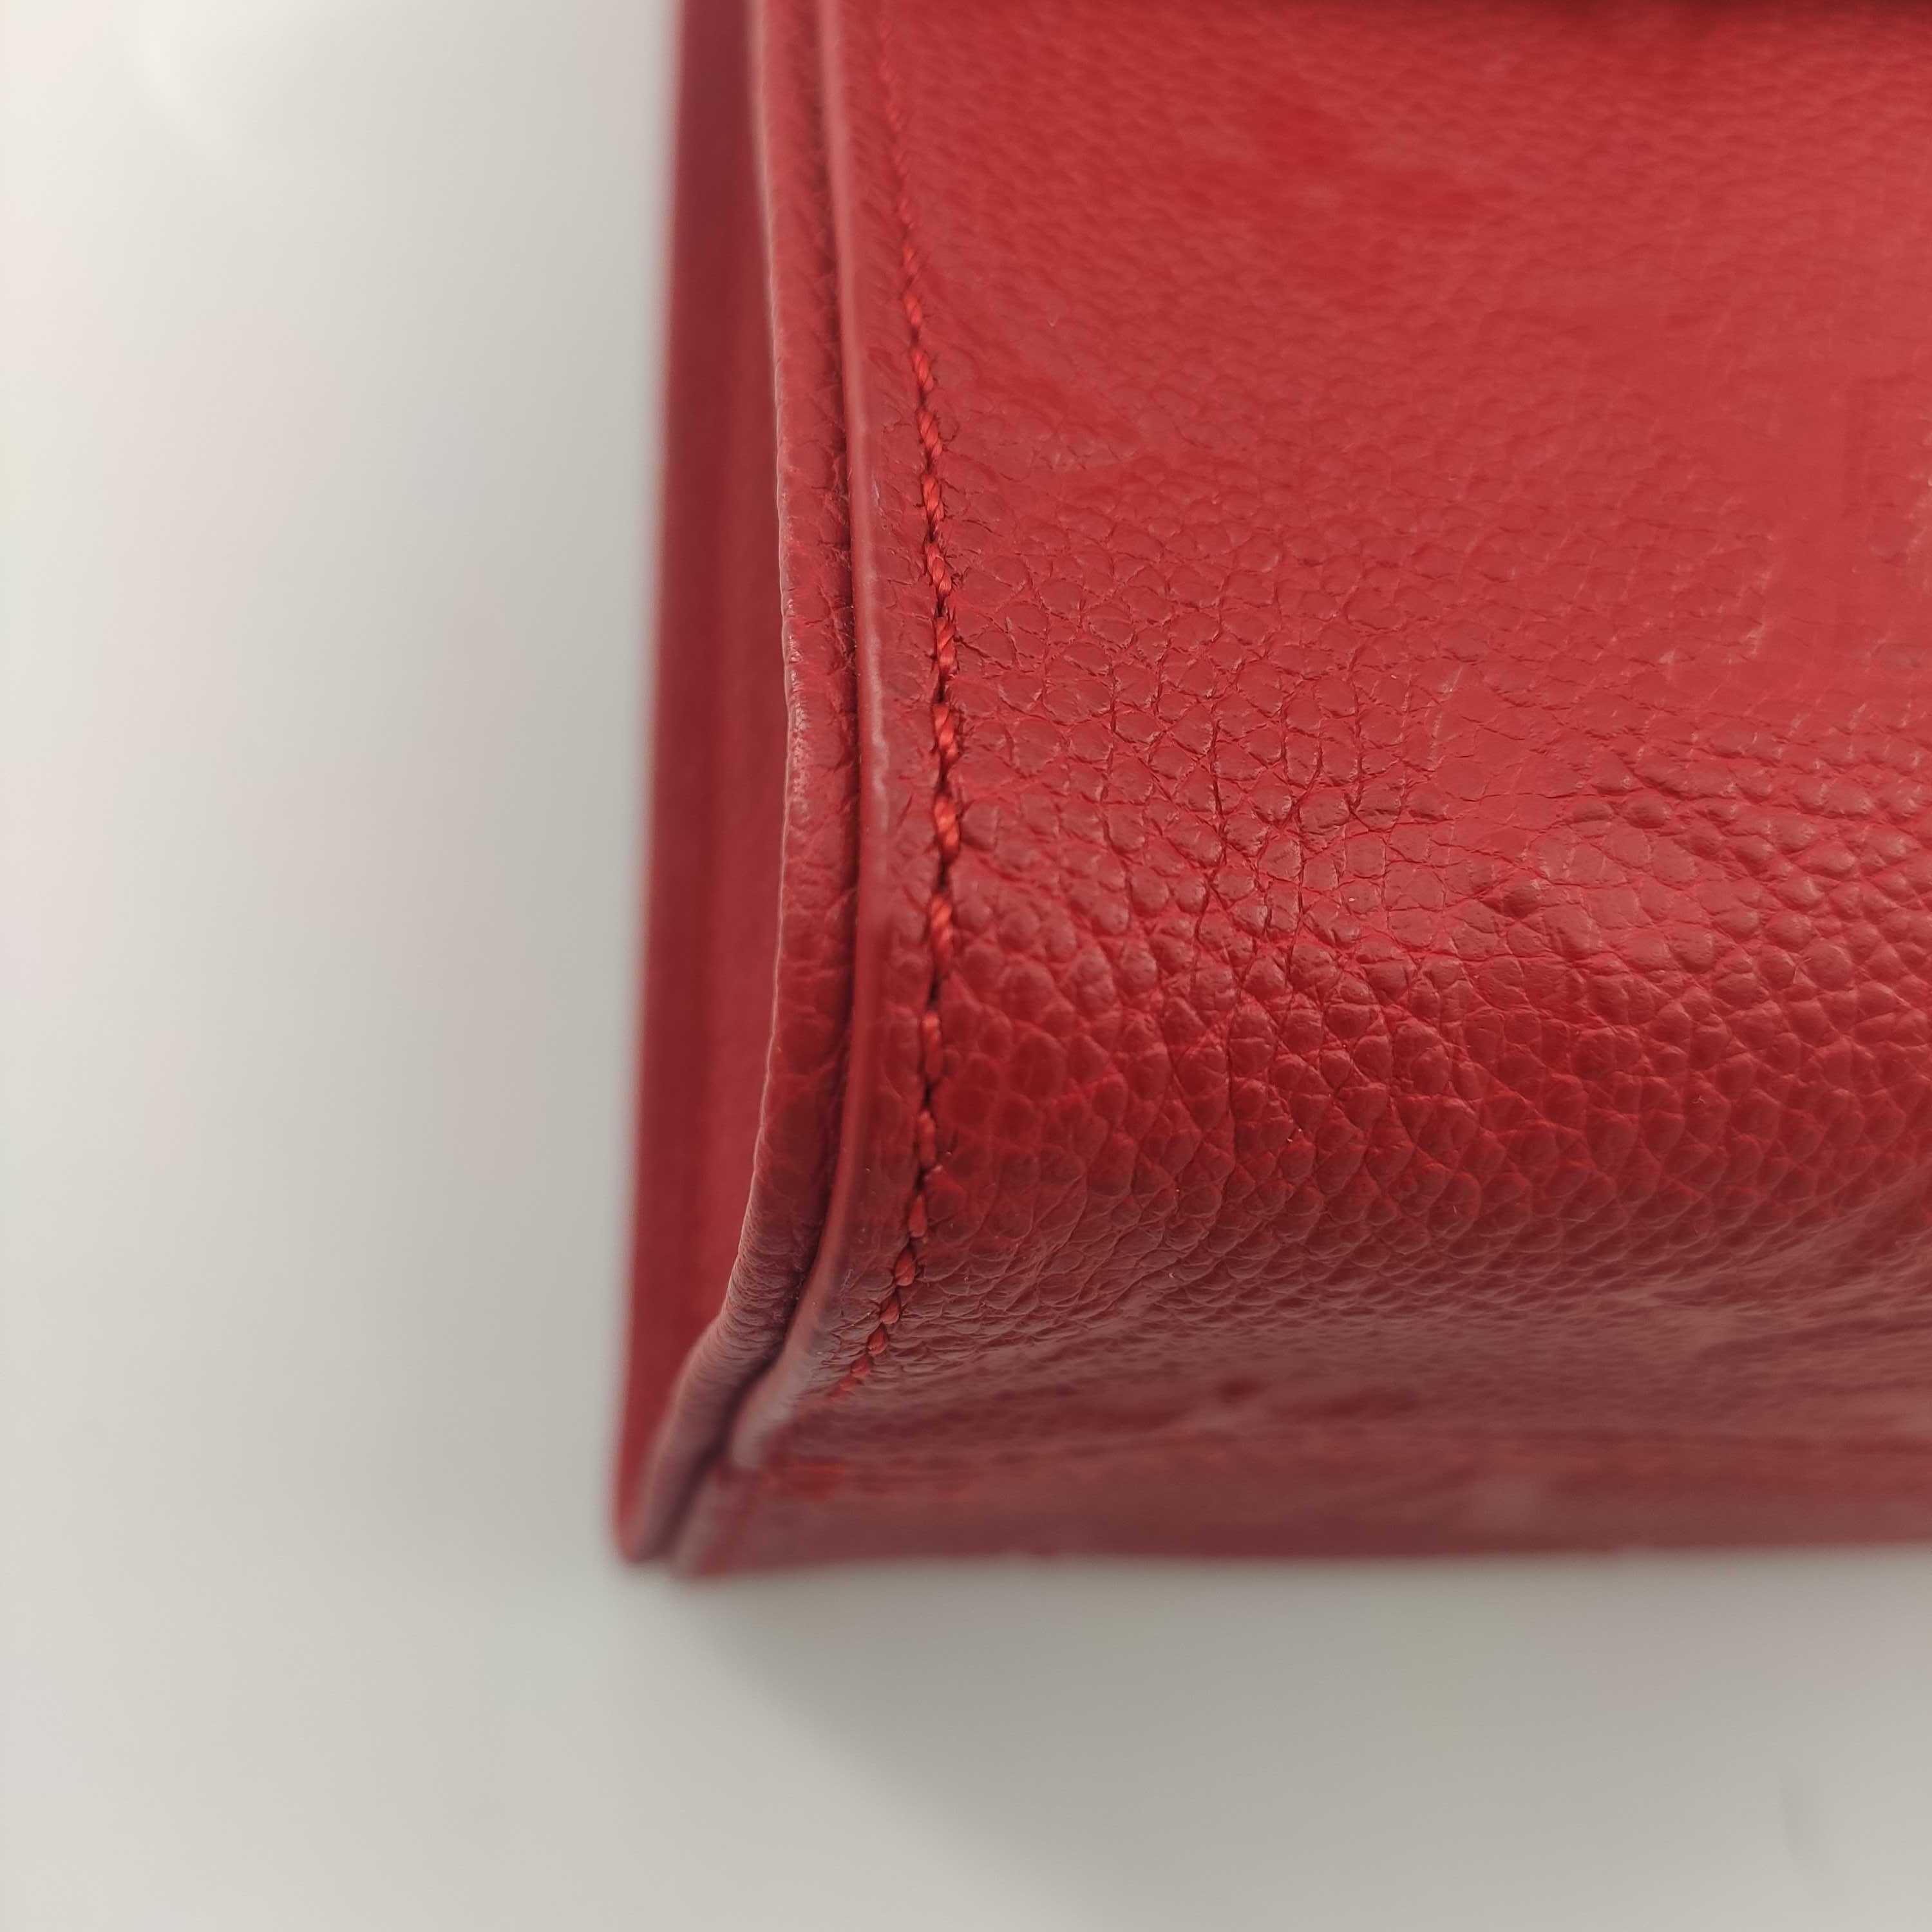 LOUIS VUITTON Saint Sulpice Shoulder bag in Red Leather 3